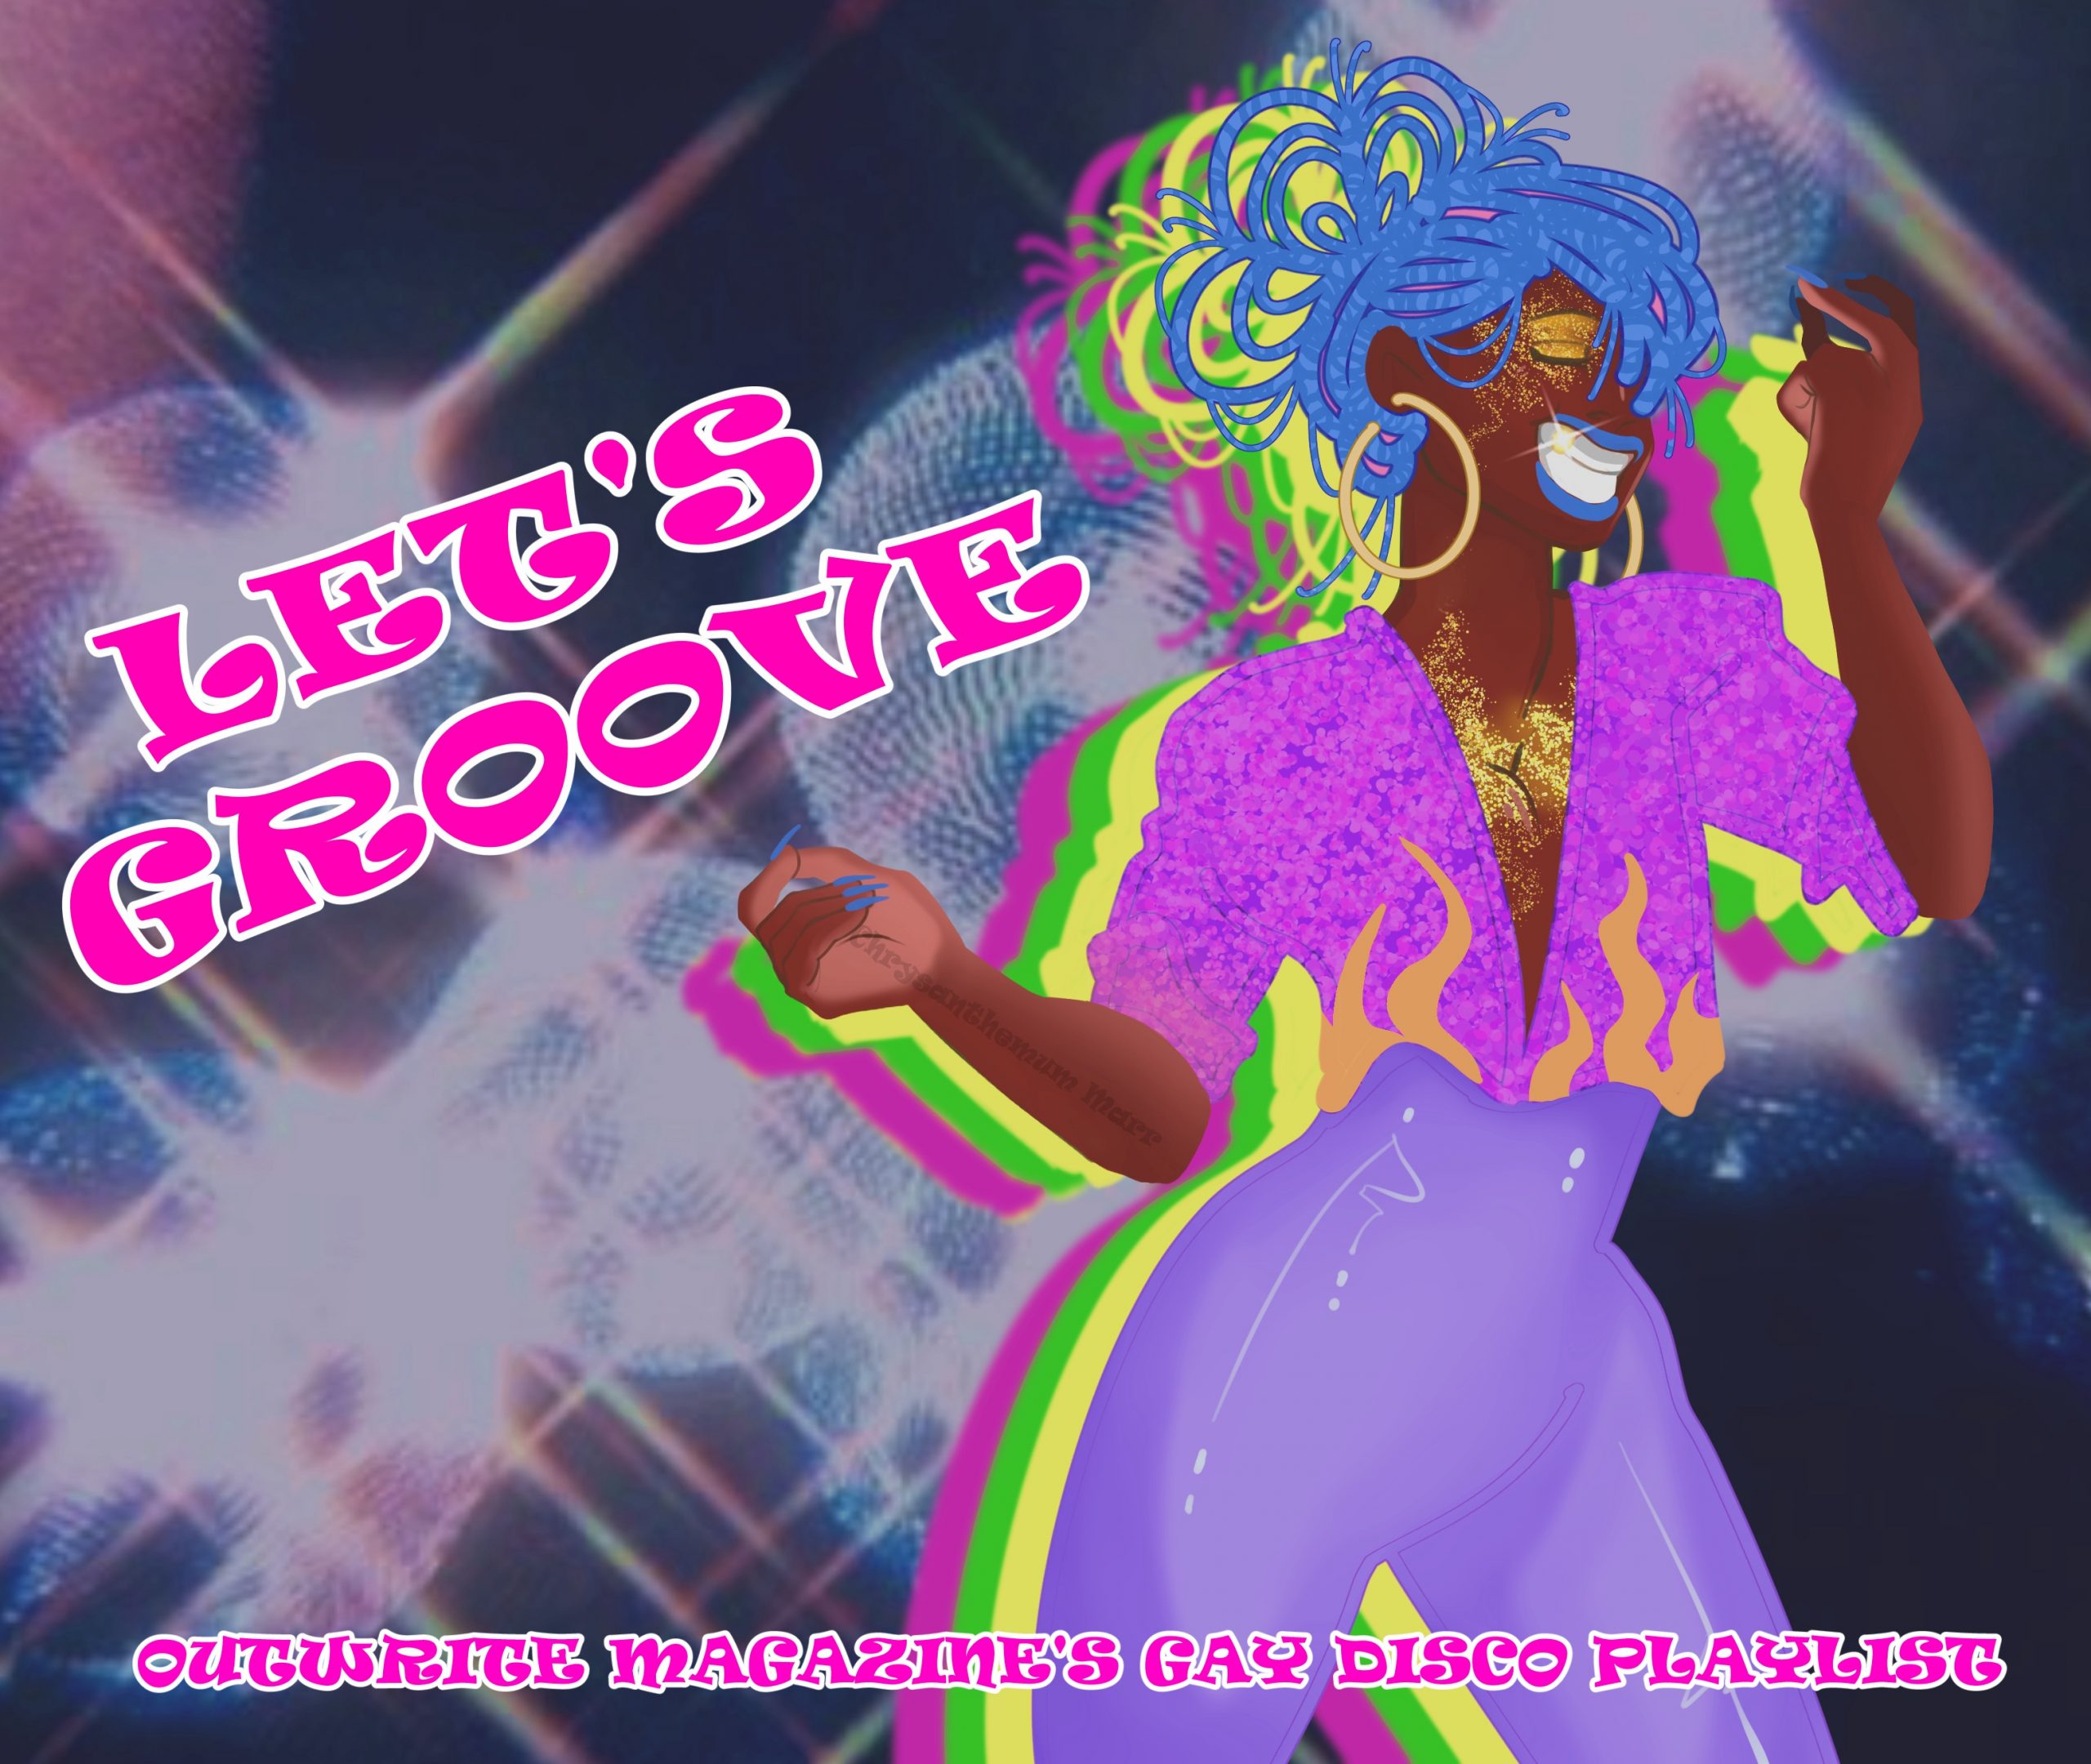 illustration of a black woman with bright blue braids and an 80s outfit dancing. bright pink text reads "let's groove, outwrite newsmagazine's gay disco playlist